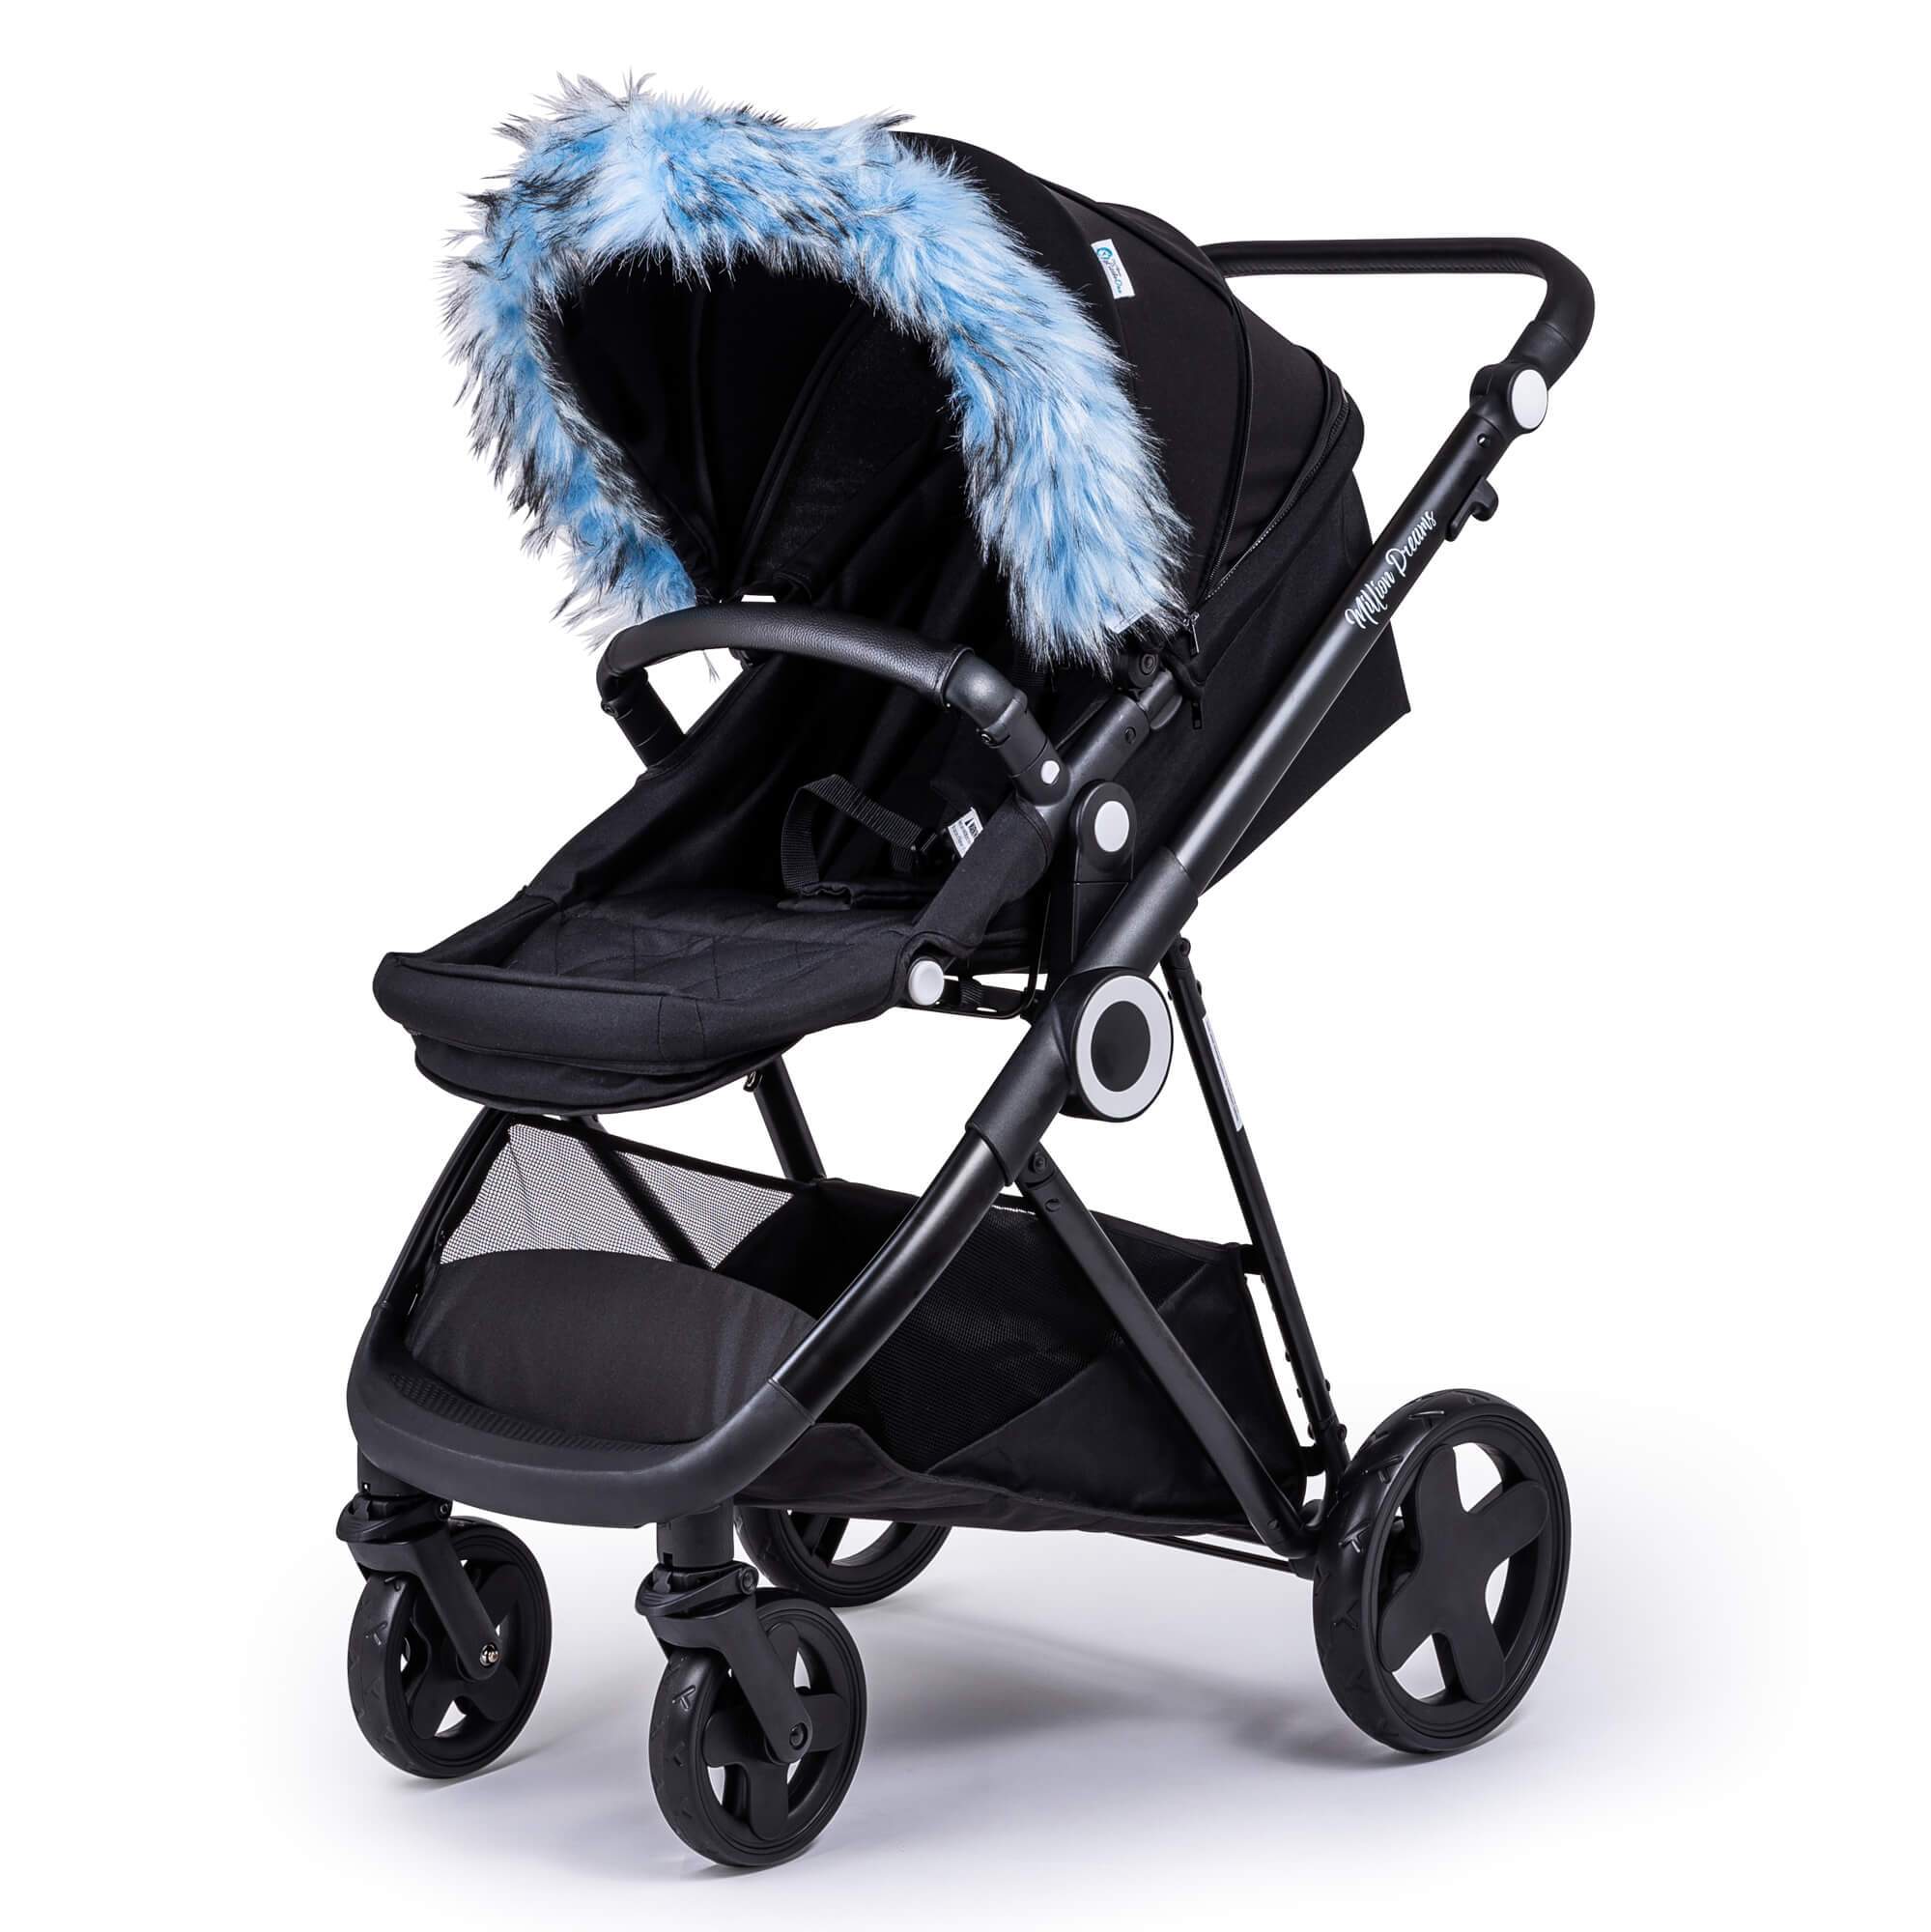 Pram Fur Hood Trim Attachment for Pushchair Compatible with Hesba - Light Blue / Fits All Models | For Your Little One